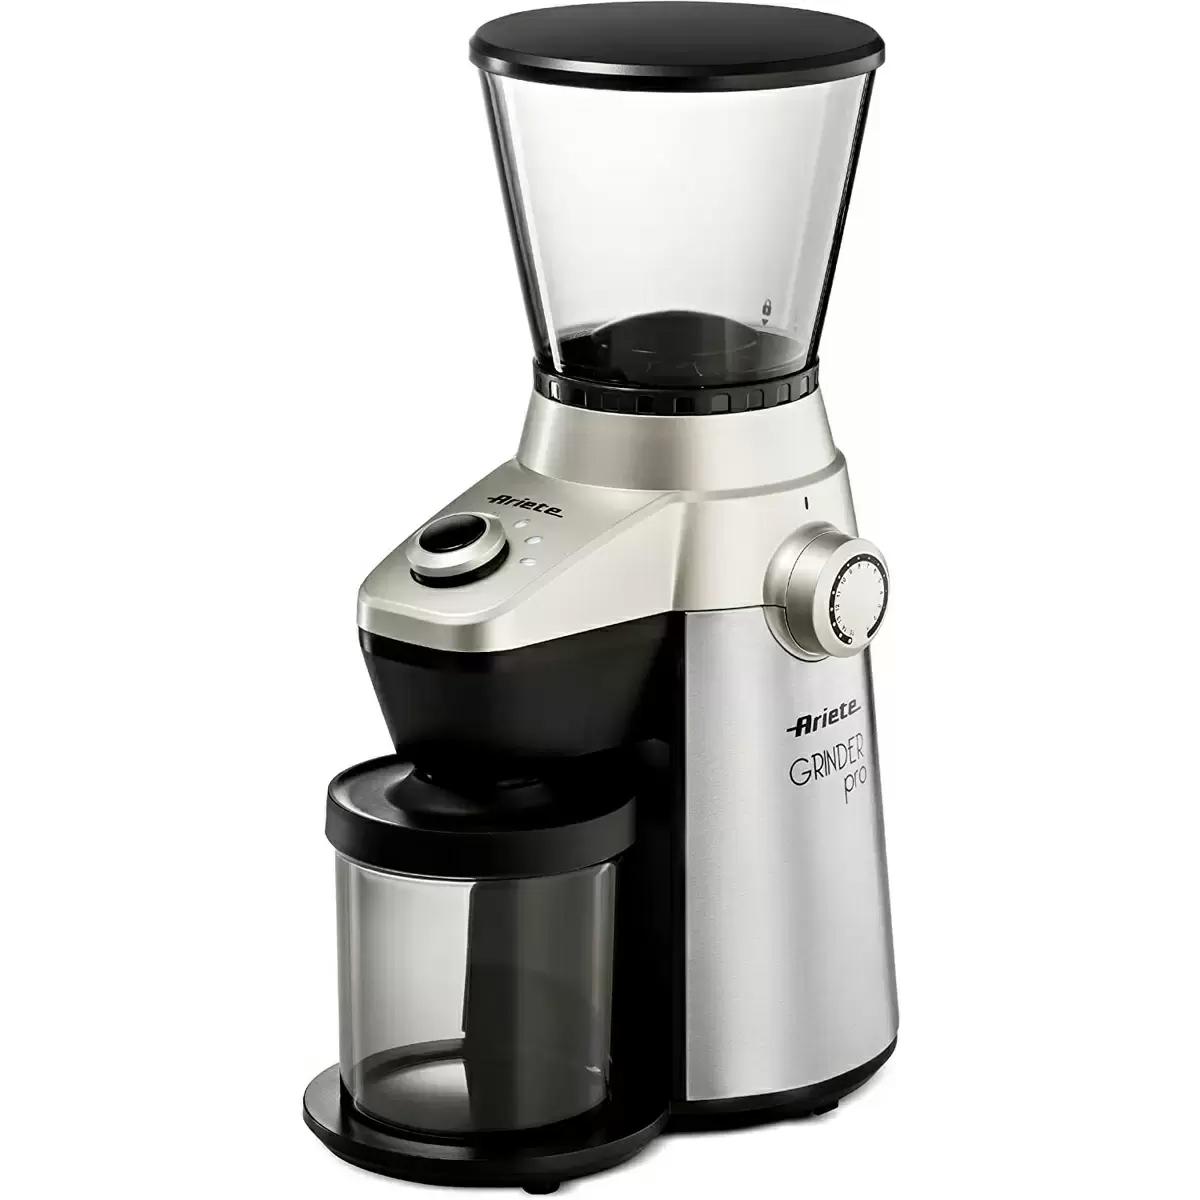 DeLonghi Ariete Conical Burr Electric Coffee Grinder for $59.99 Shipped